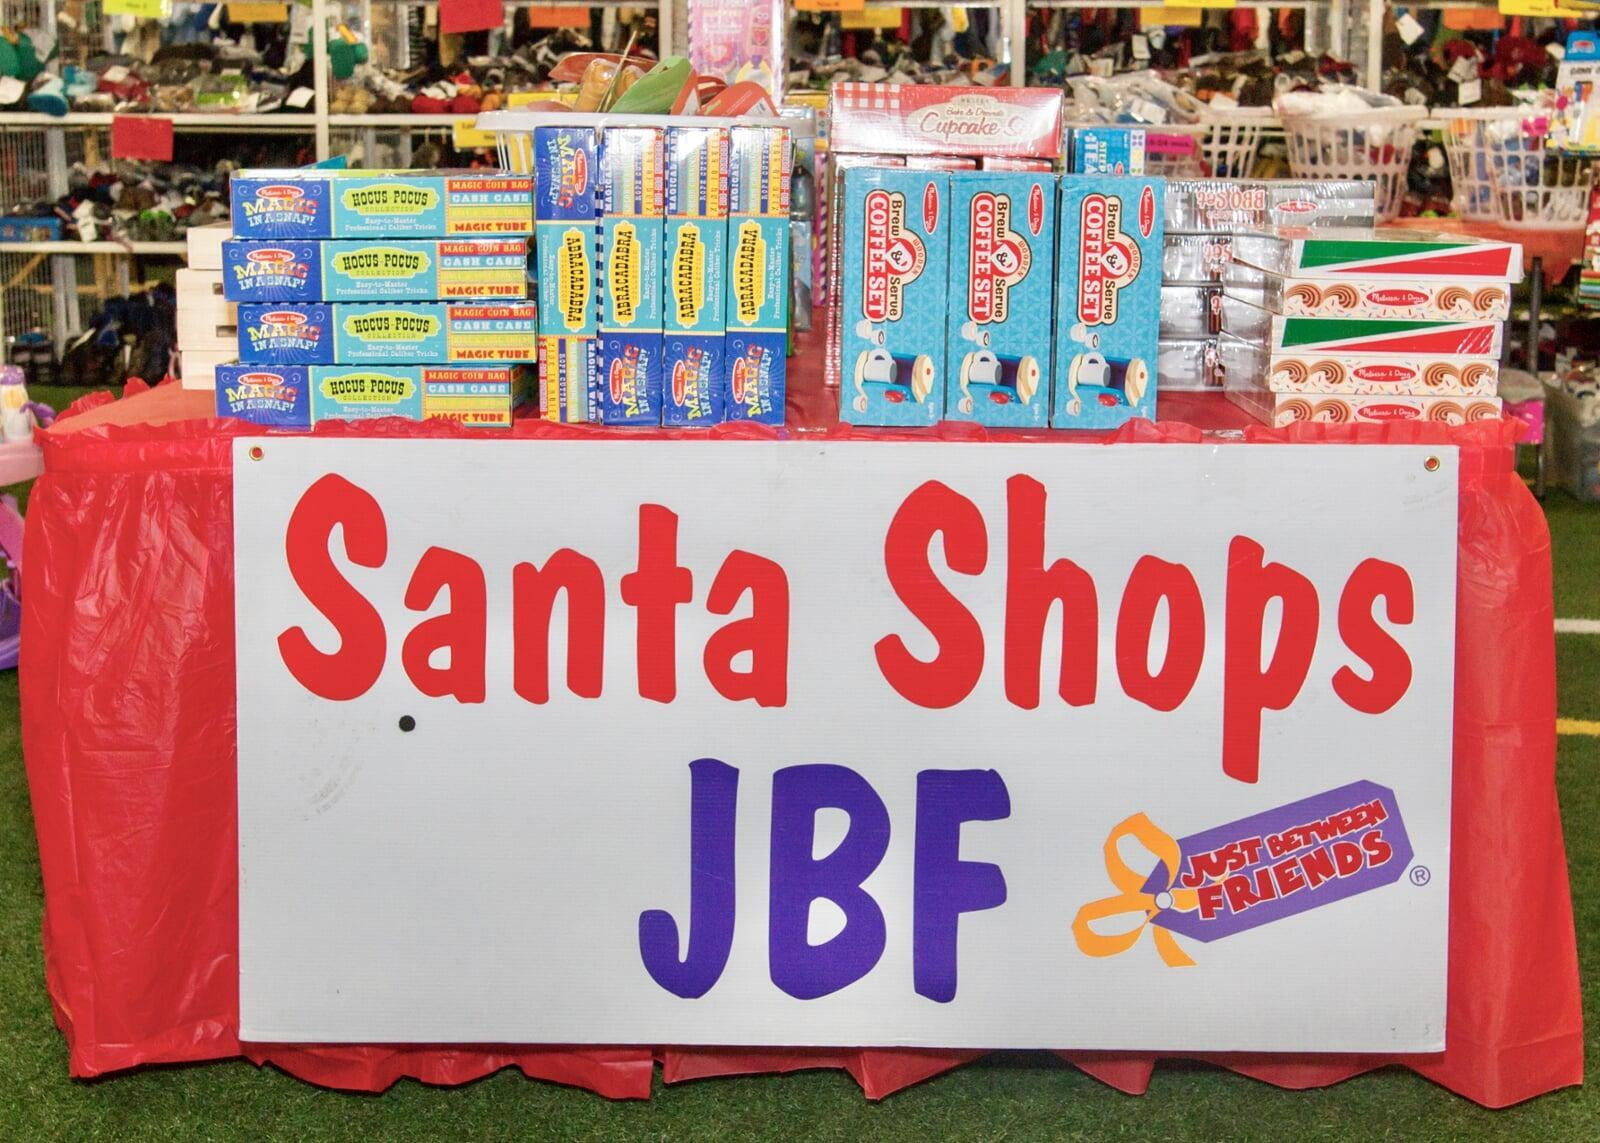 Toys displayed on a table that says "Santa Shops JBF".